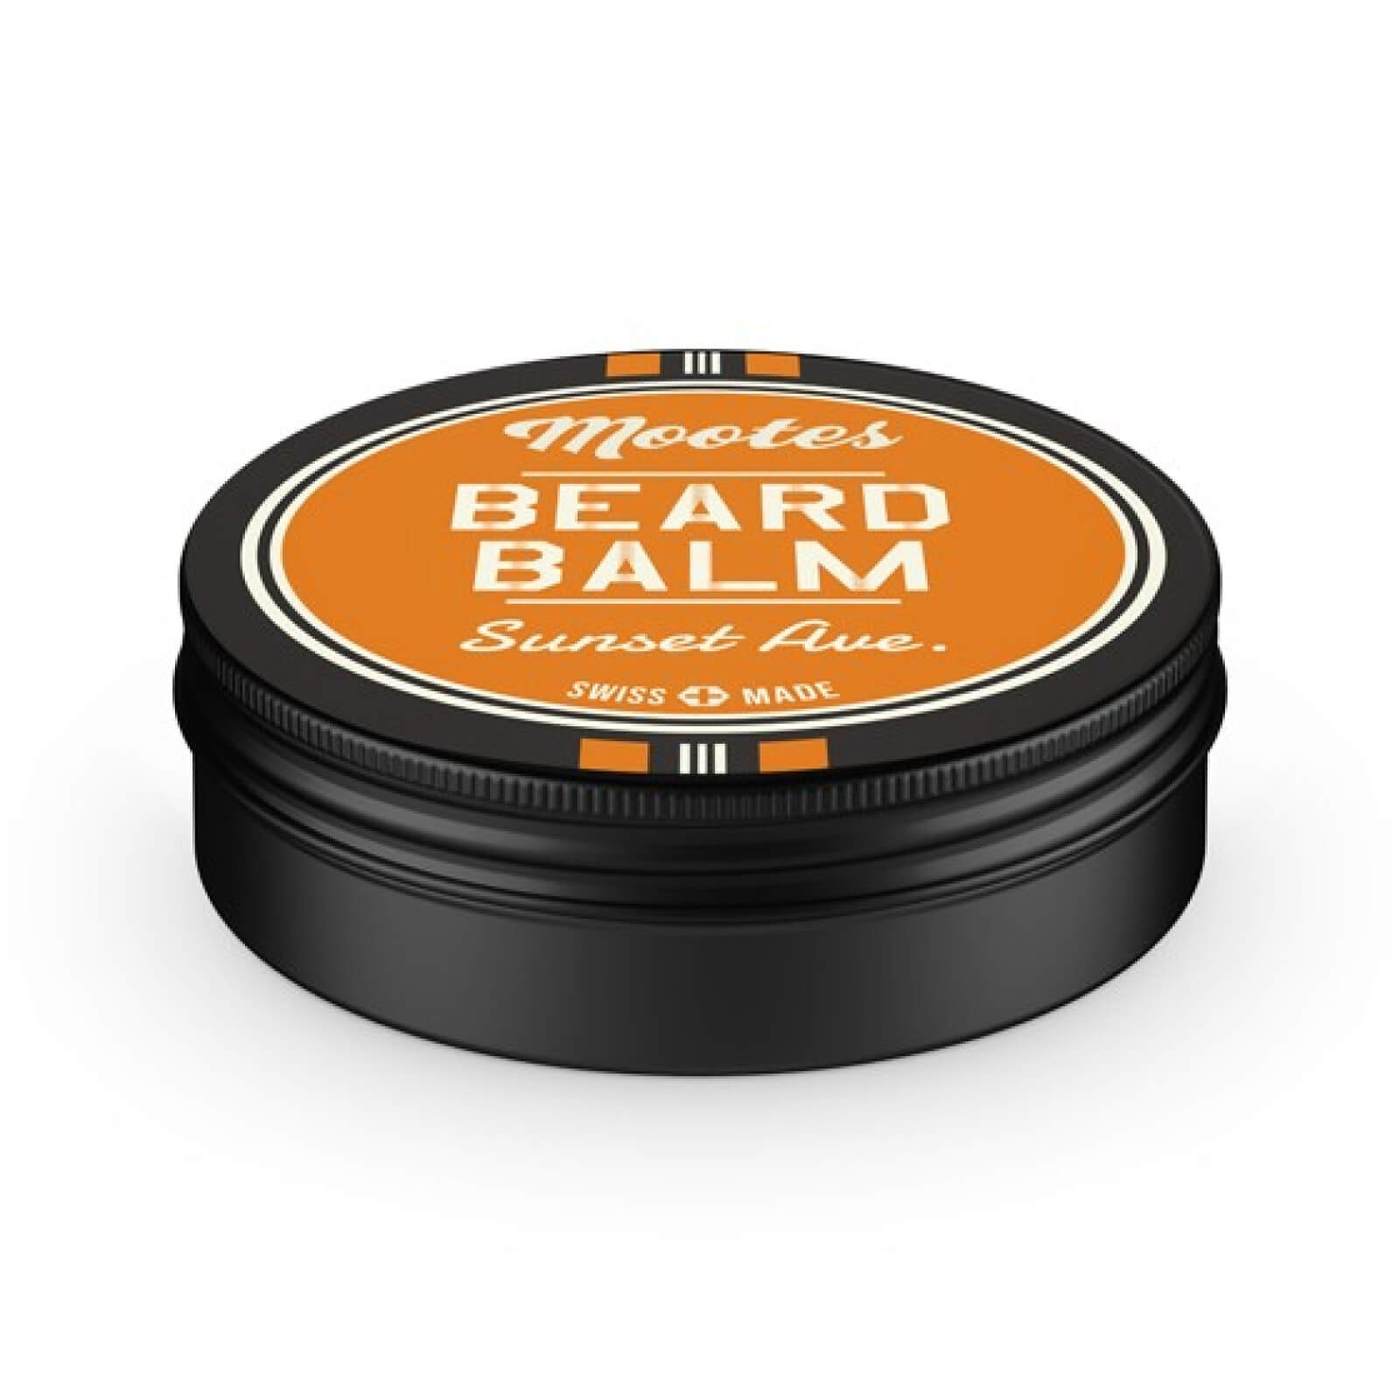 Mootes Beard Balm: Sunset Ave. from side